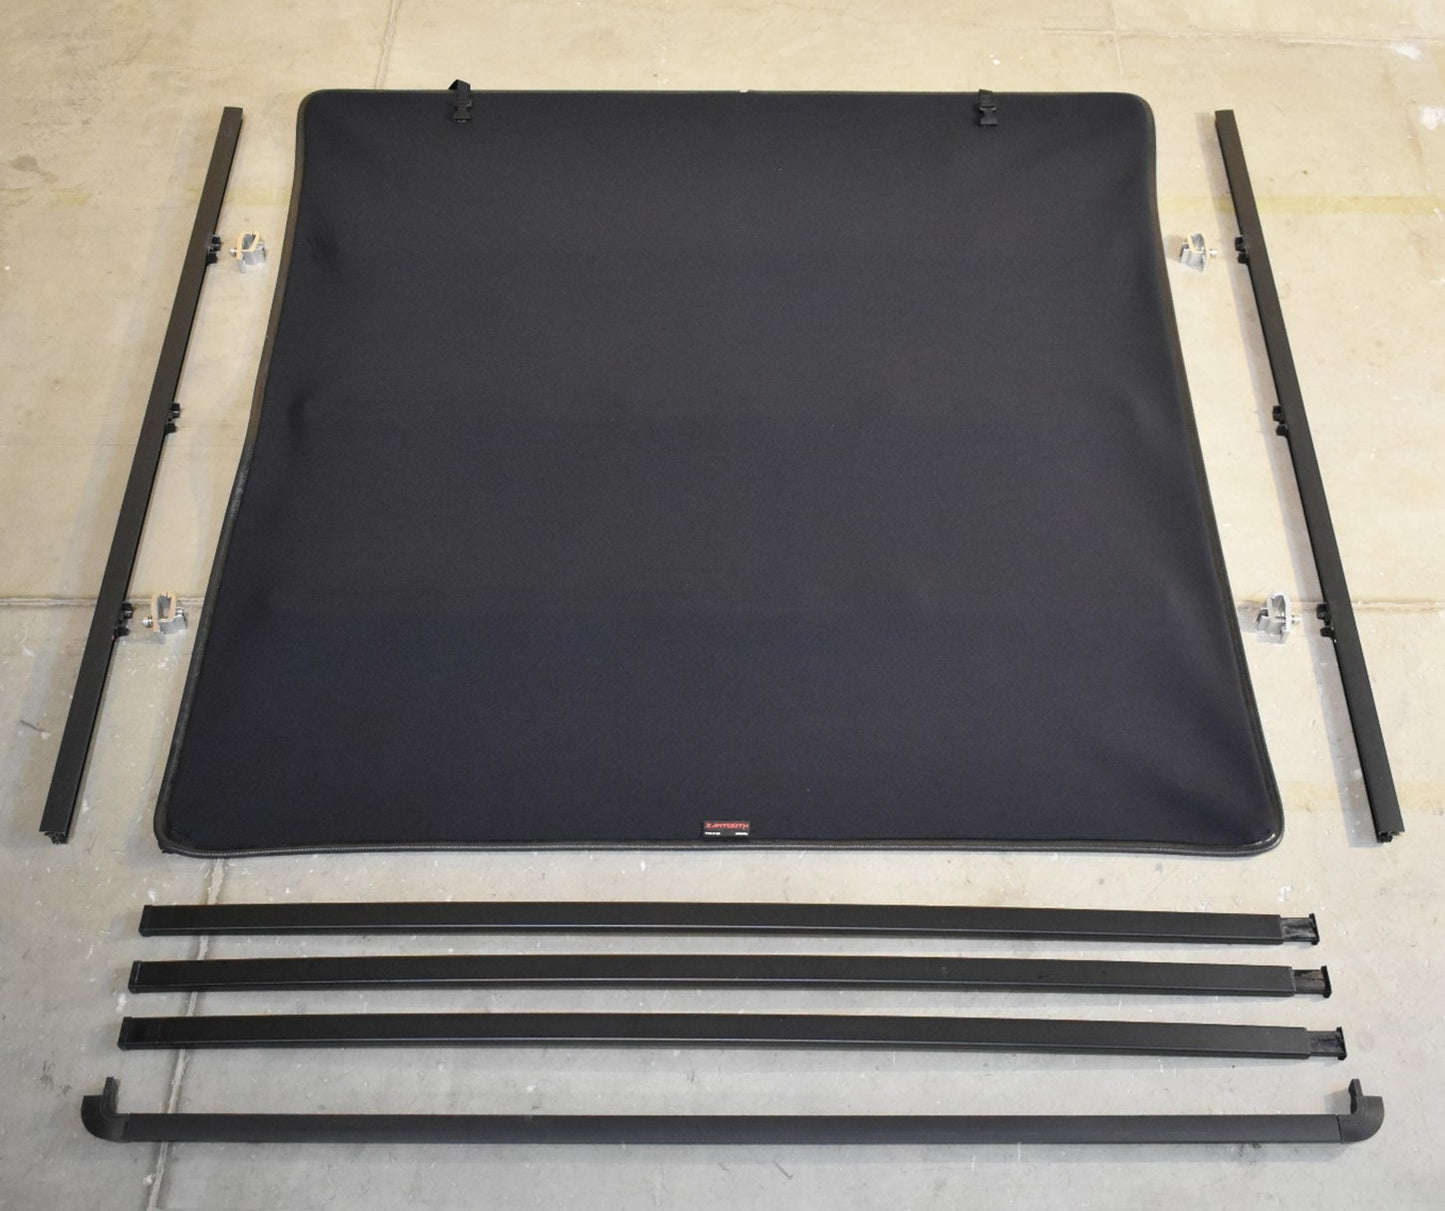 Toyota Tacoma Sawtooth expandable pickup truck bed components